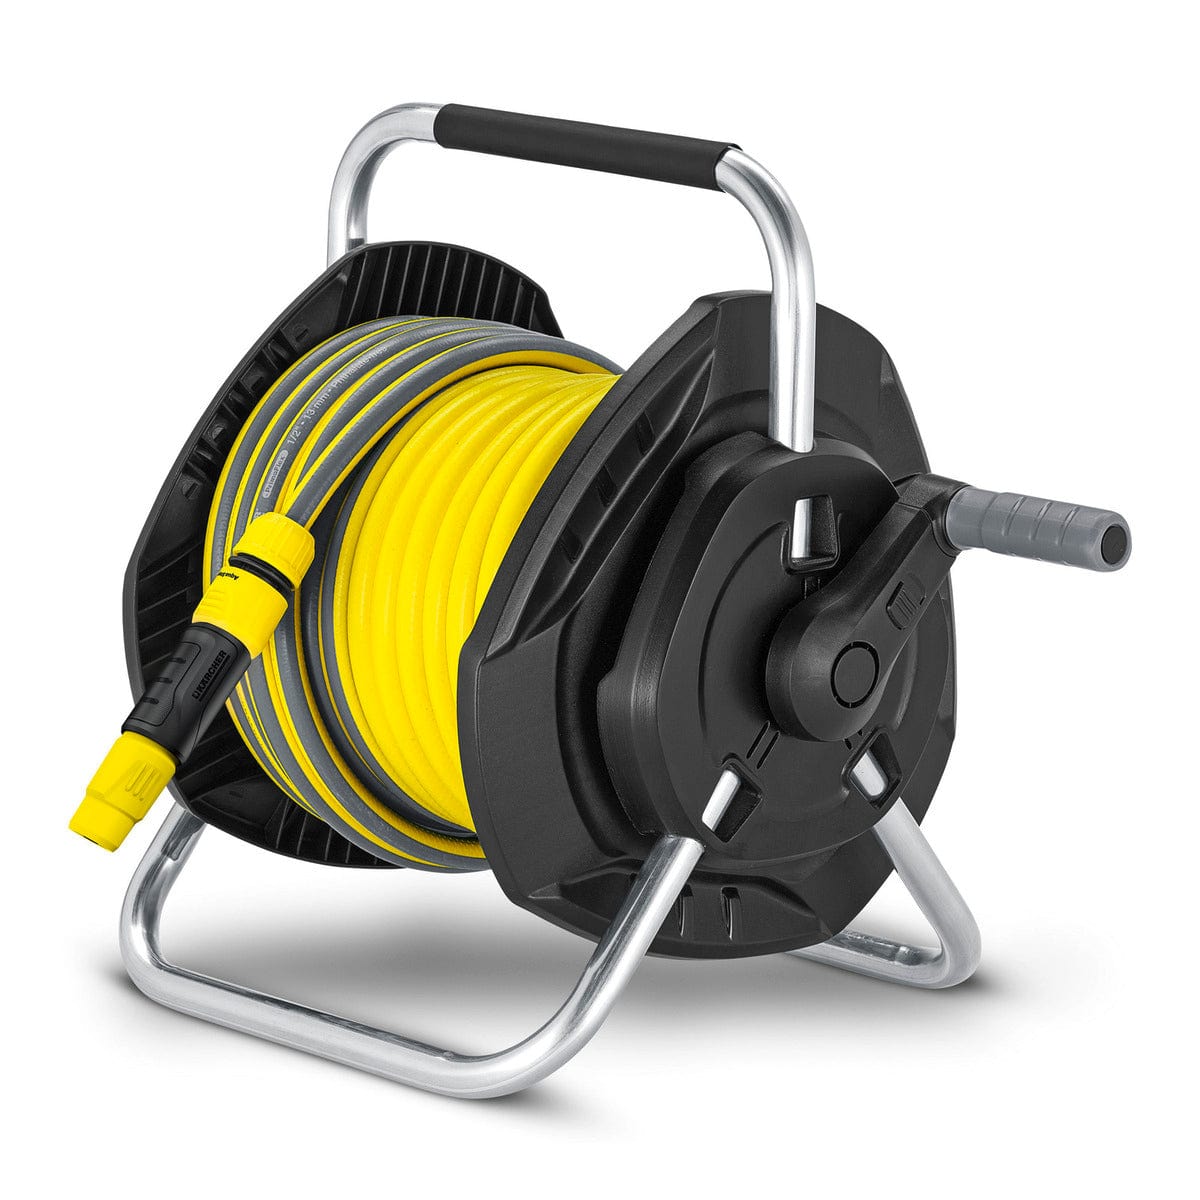 Karcher Wall Hose Reel Kit 1⁄2" 25m - HR 4.525 | Supply Master | Accra, Ghana Cleaning Equipment Accessories Buy Tools hardware Building materials